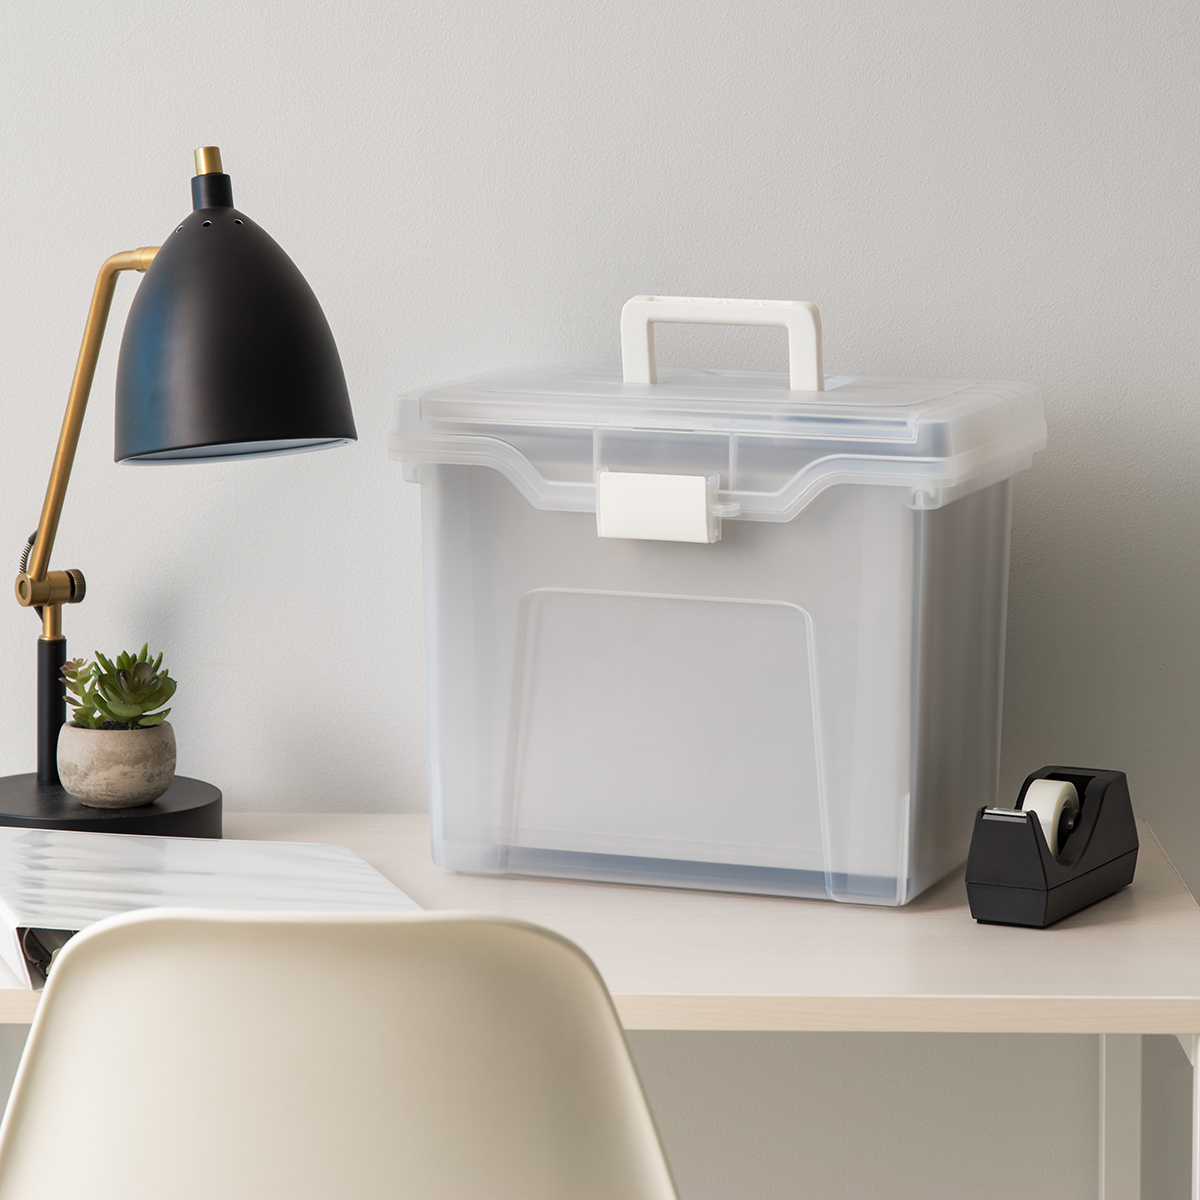 https://www.containerstore.com/catalogimages/359320/10076965-letter-size-portable-file-b.jpg